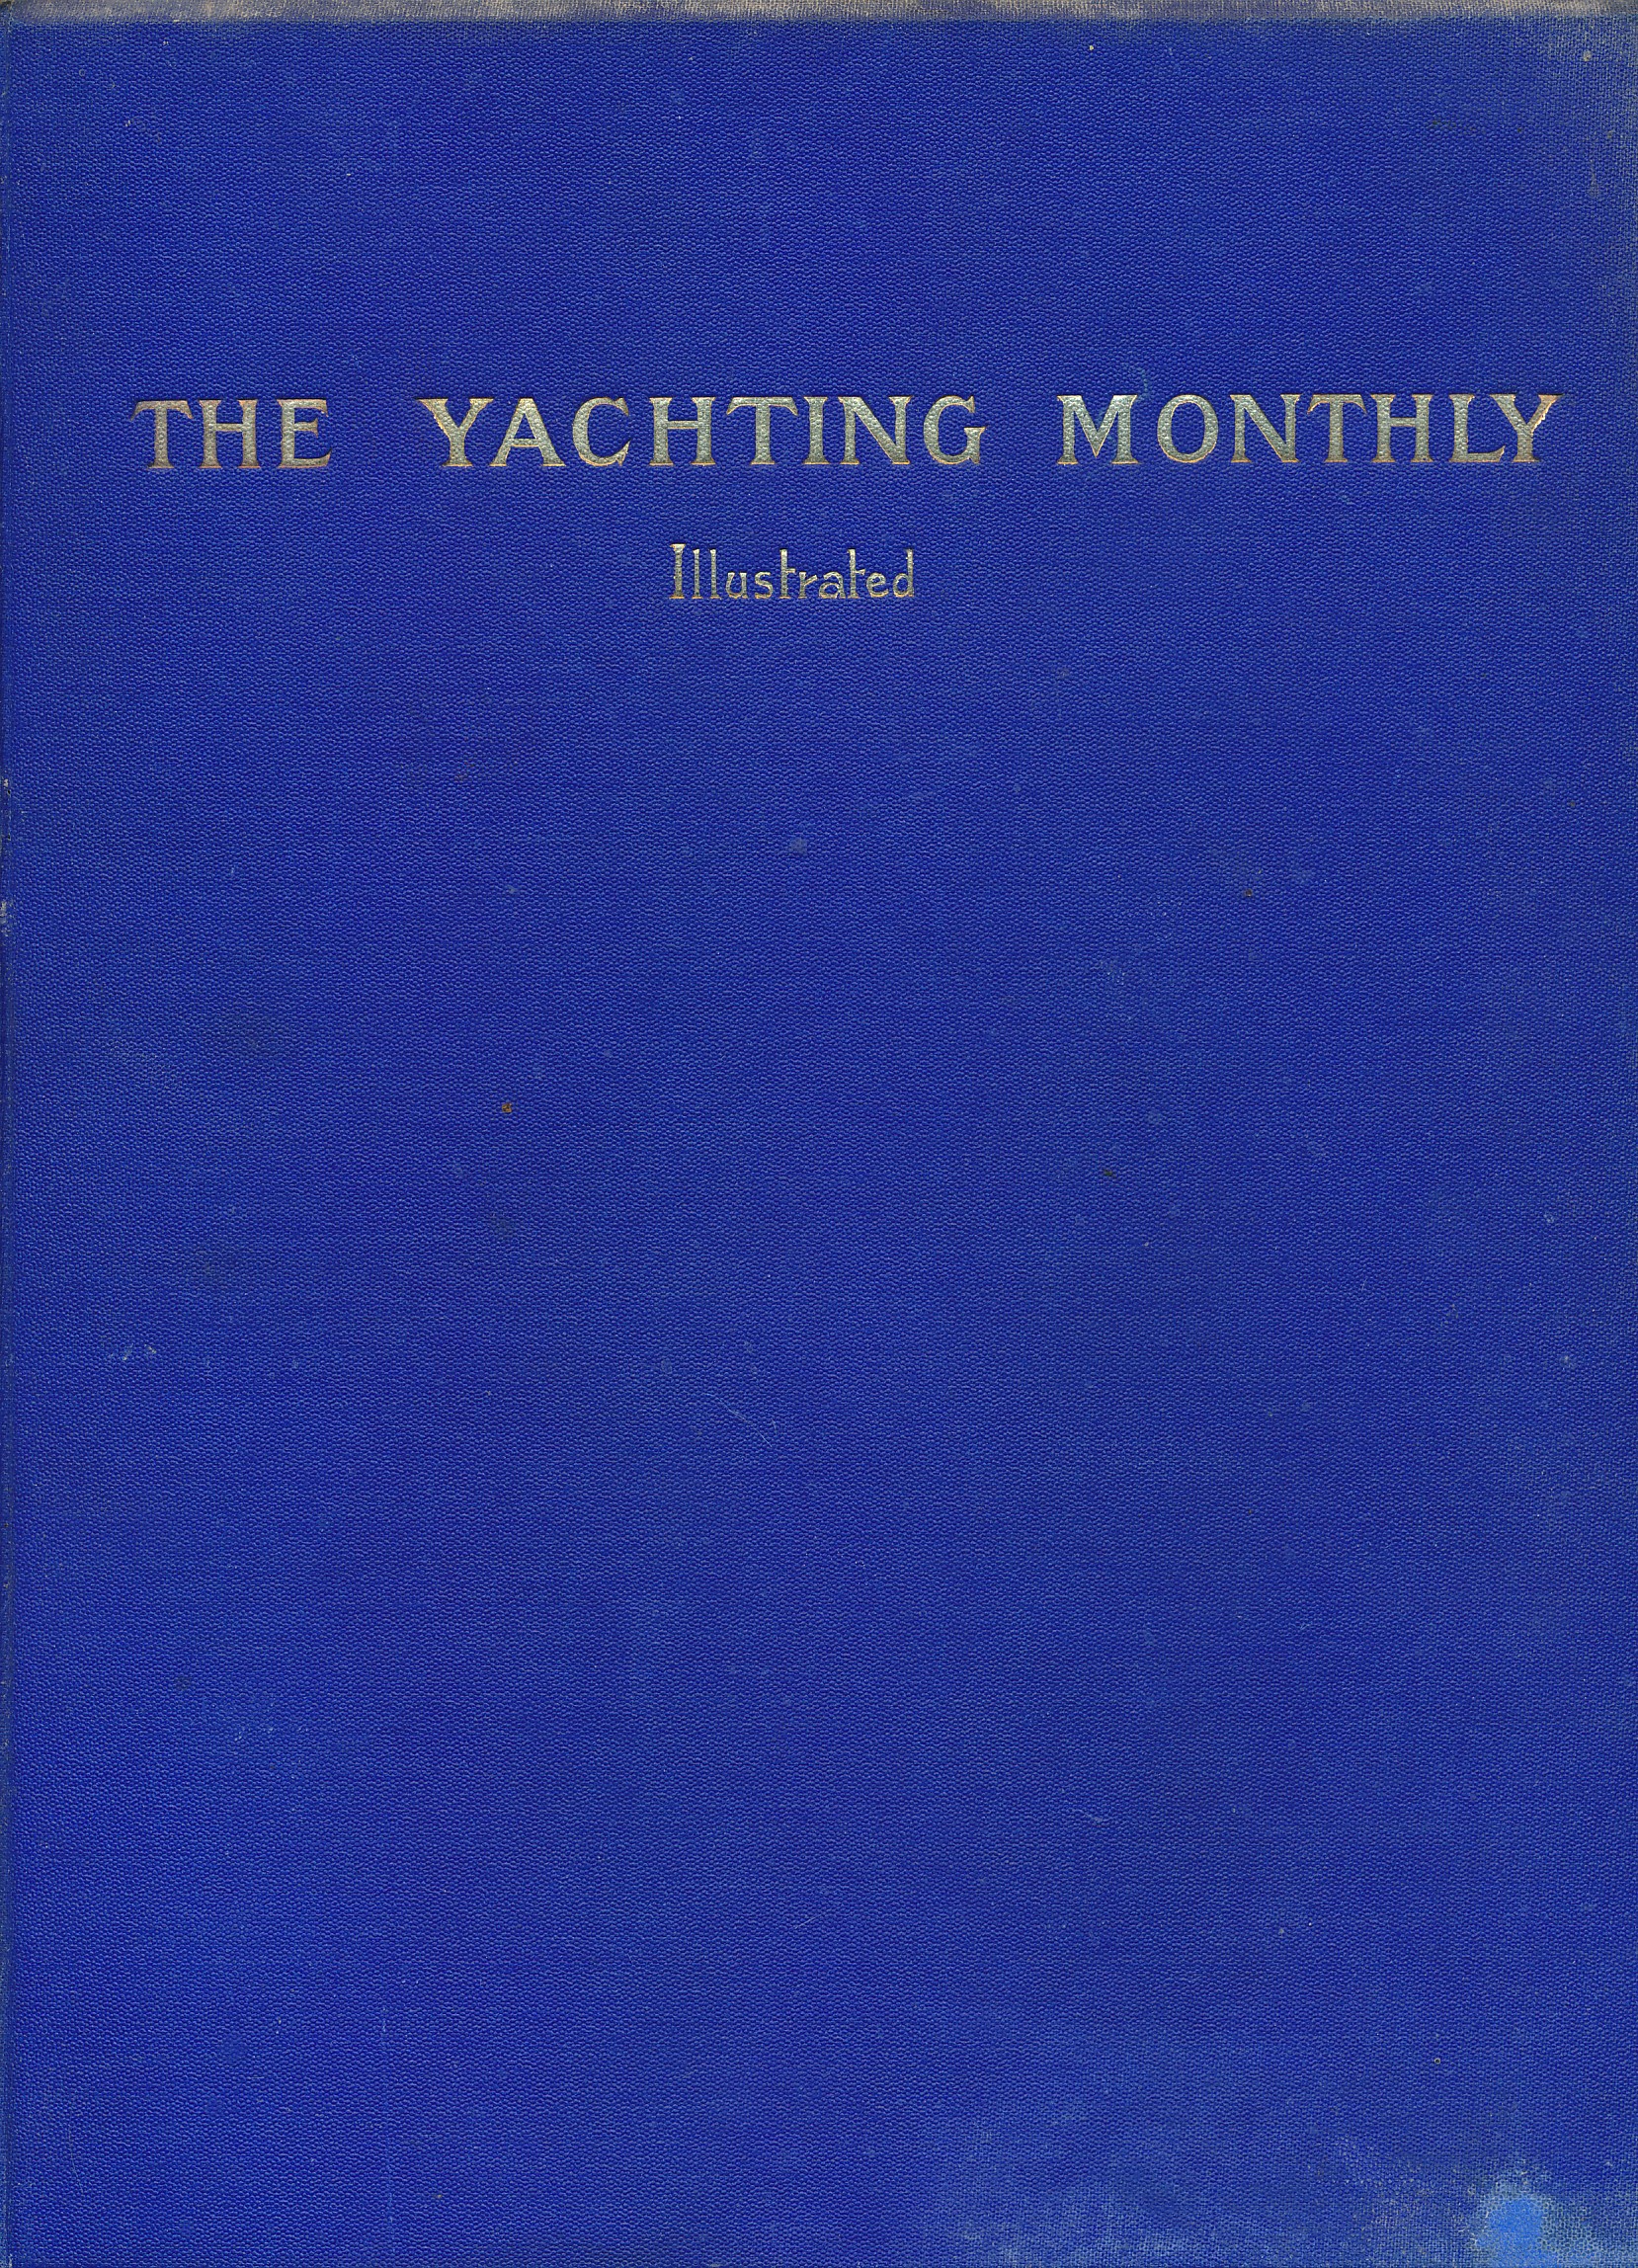 The Yachting  and Boating Monthly. [Illustrated].  Volume VIII.- Nos. XLIII. to XLIVIII. November, 1909 - April, 1910.